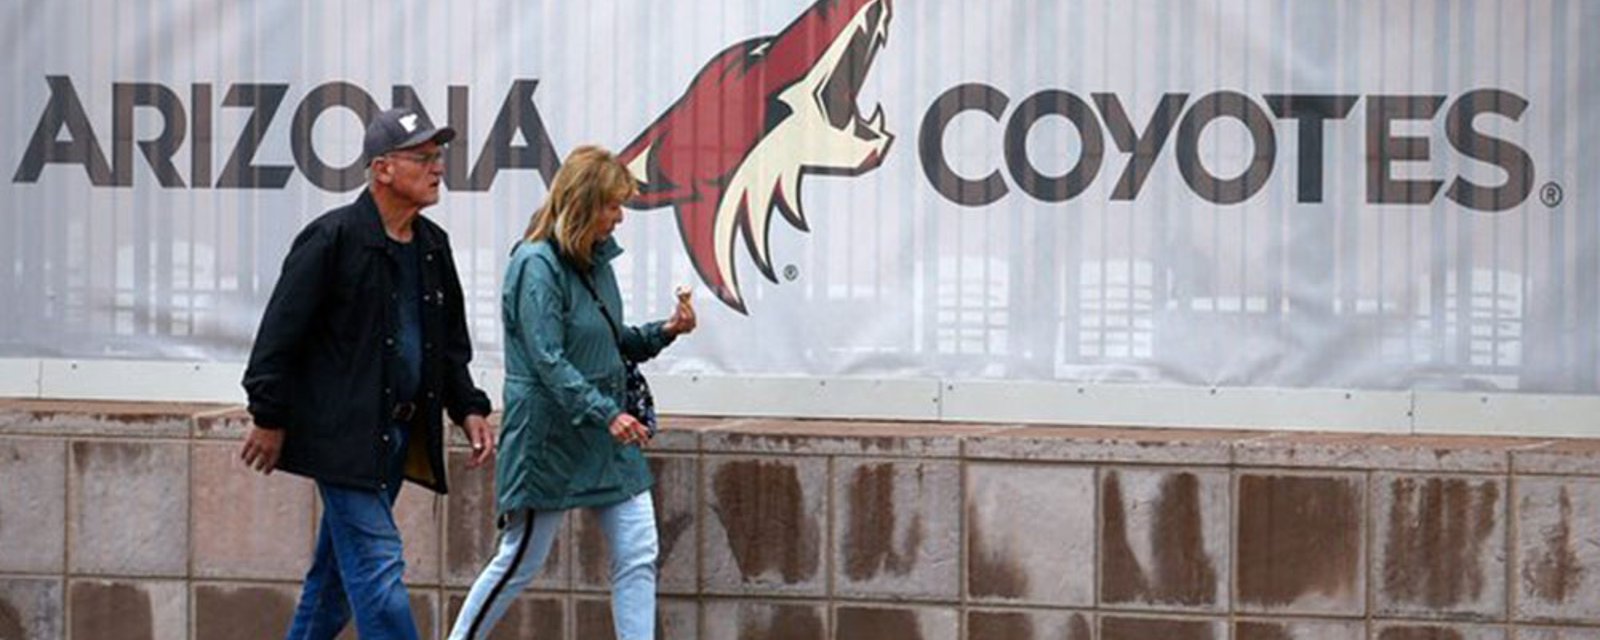 Scottsdale mayor tells the Coyotes that they're not welcome at proposed arena site